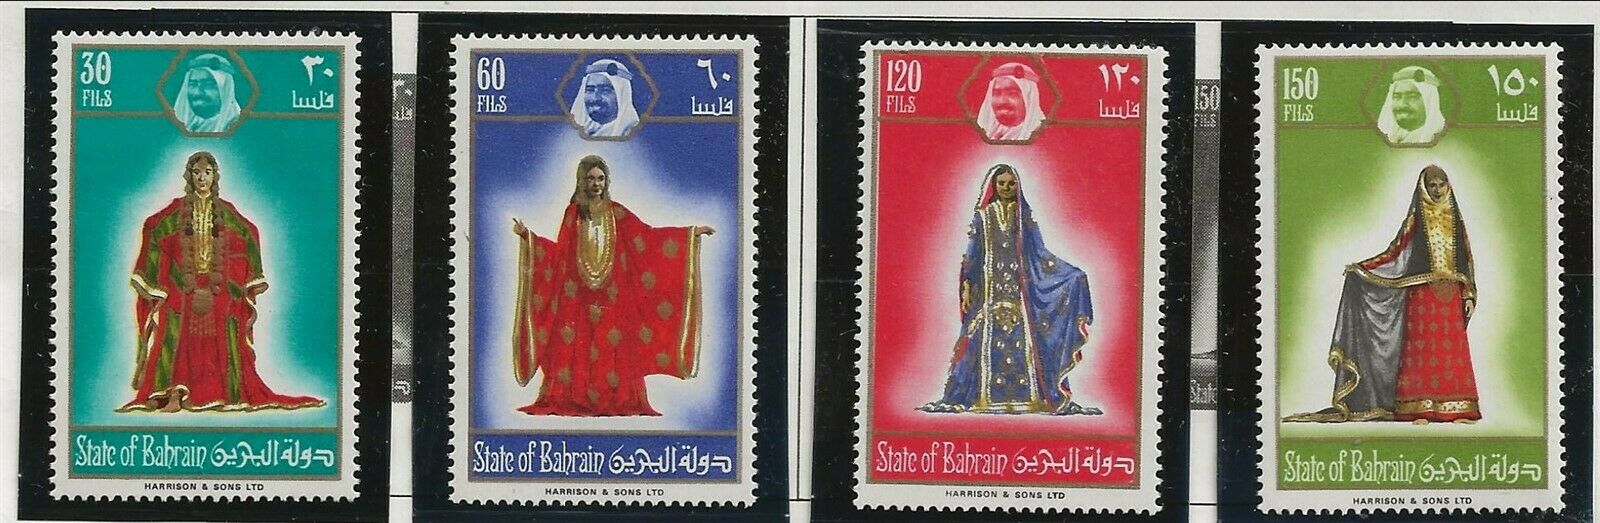 BAHRAIN Sc 214-7 NH issue of 1975 - COSTUMES